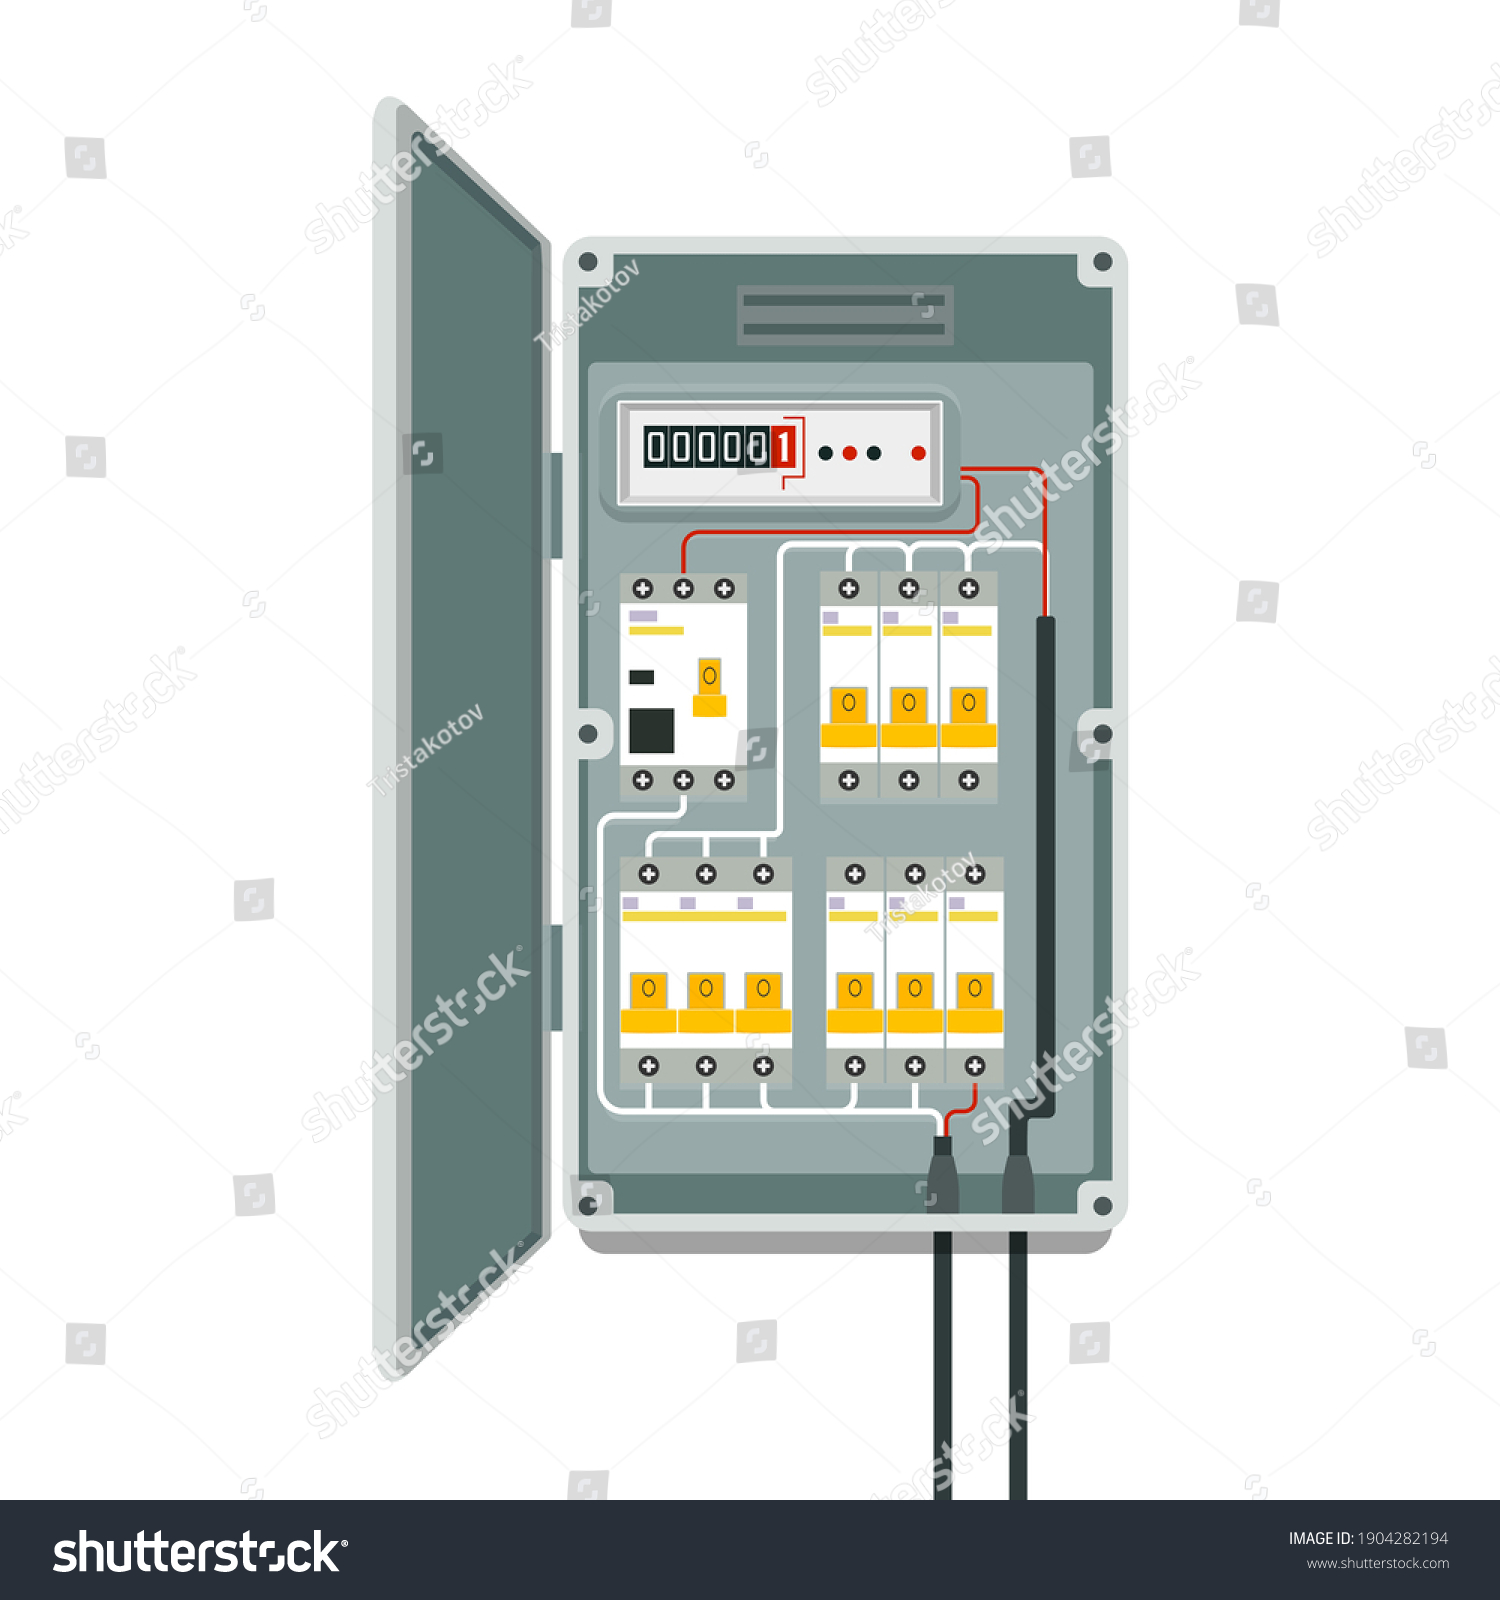 SVG of Fuse box. Electrical power switch panel. Electricity equipment. Vector.
EPS 10. svg